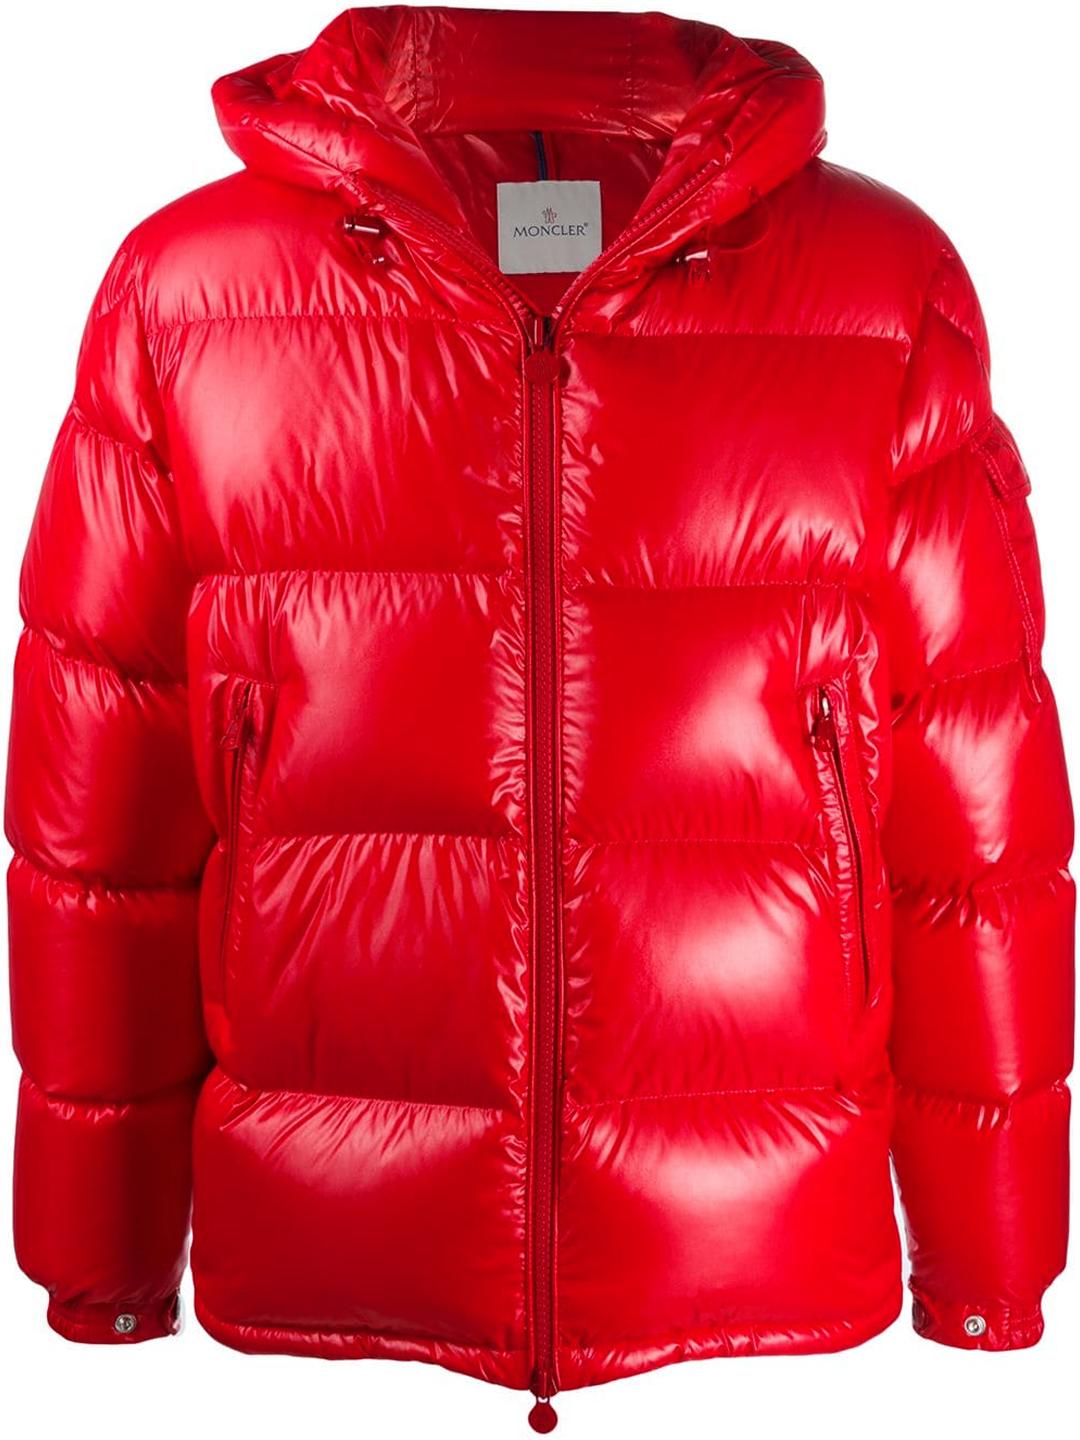 Moncler Synthetic Puffer Down Jacket in Red for Men - Save 61% - Lyst